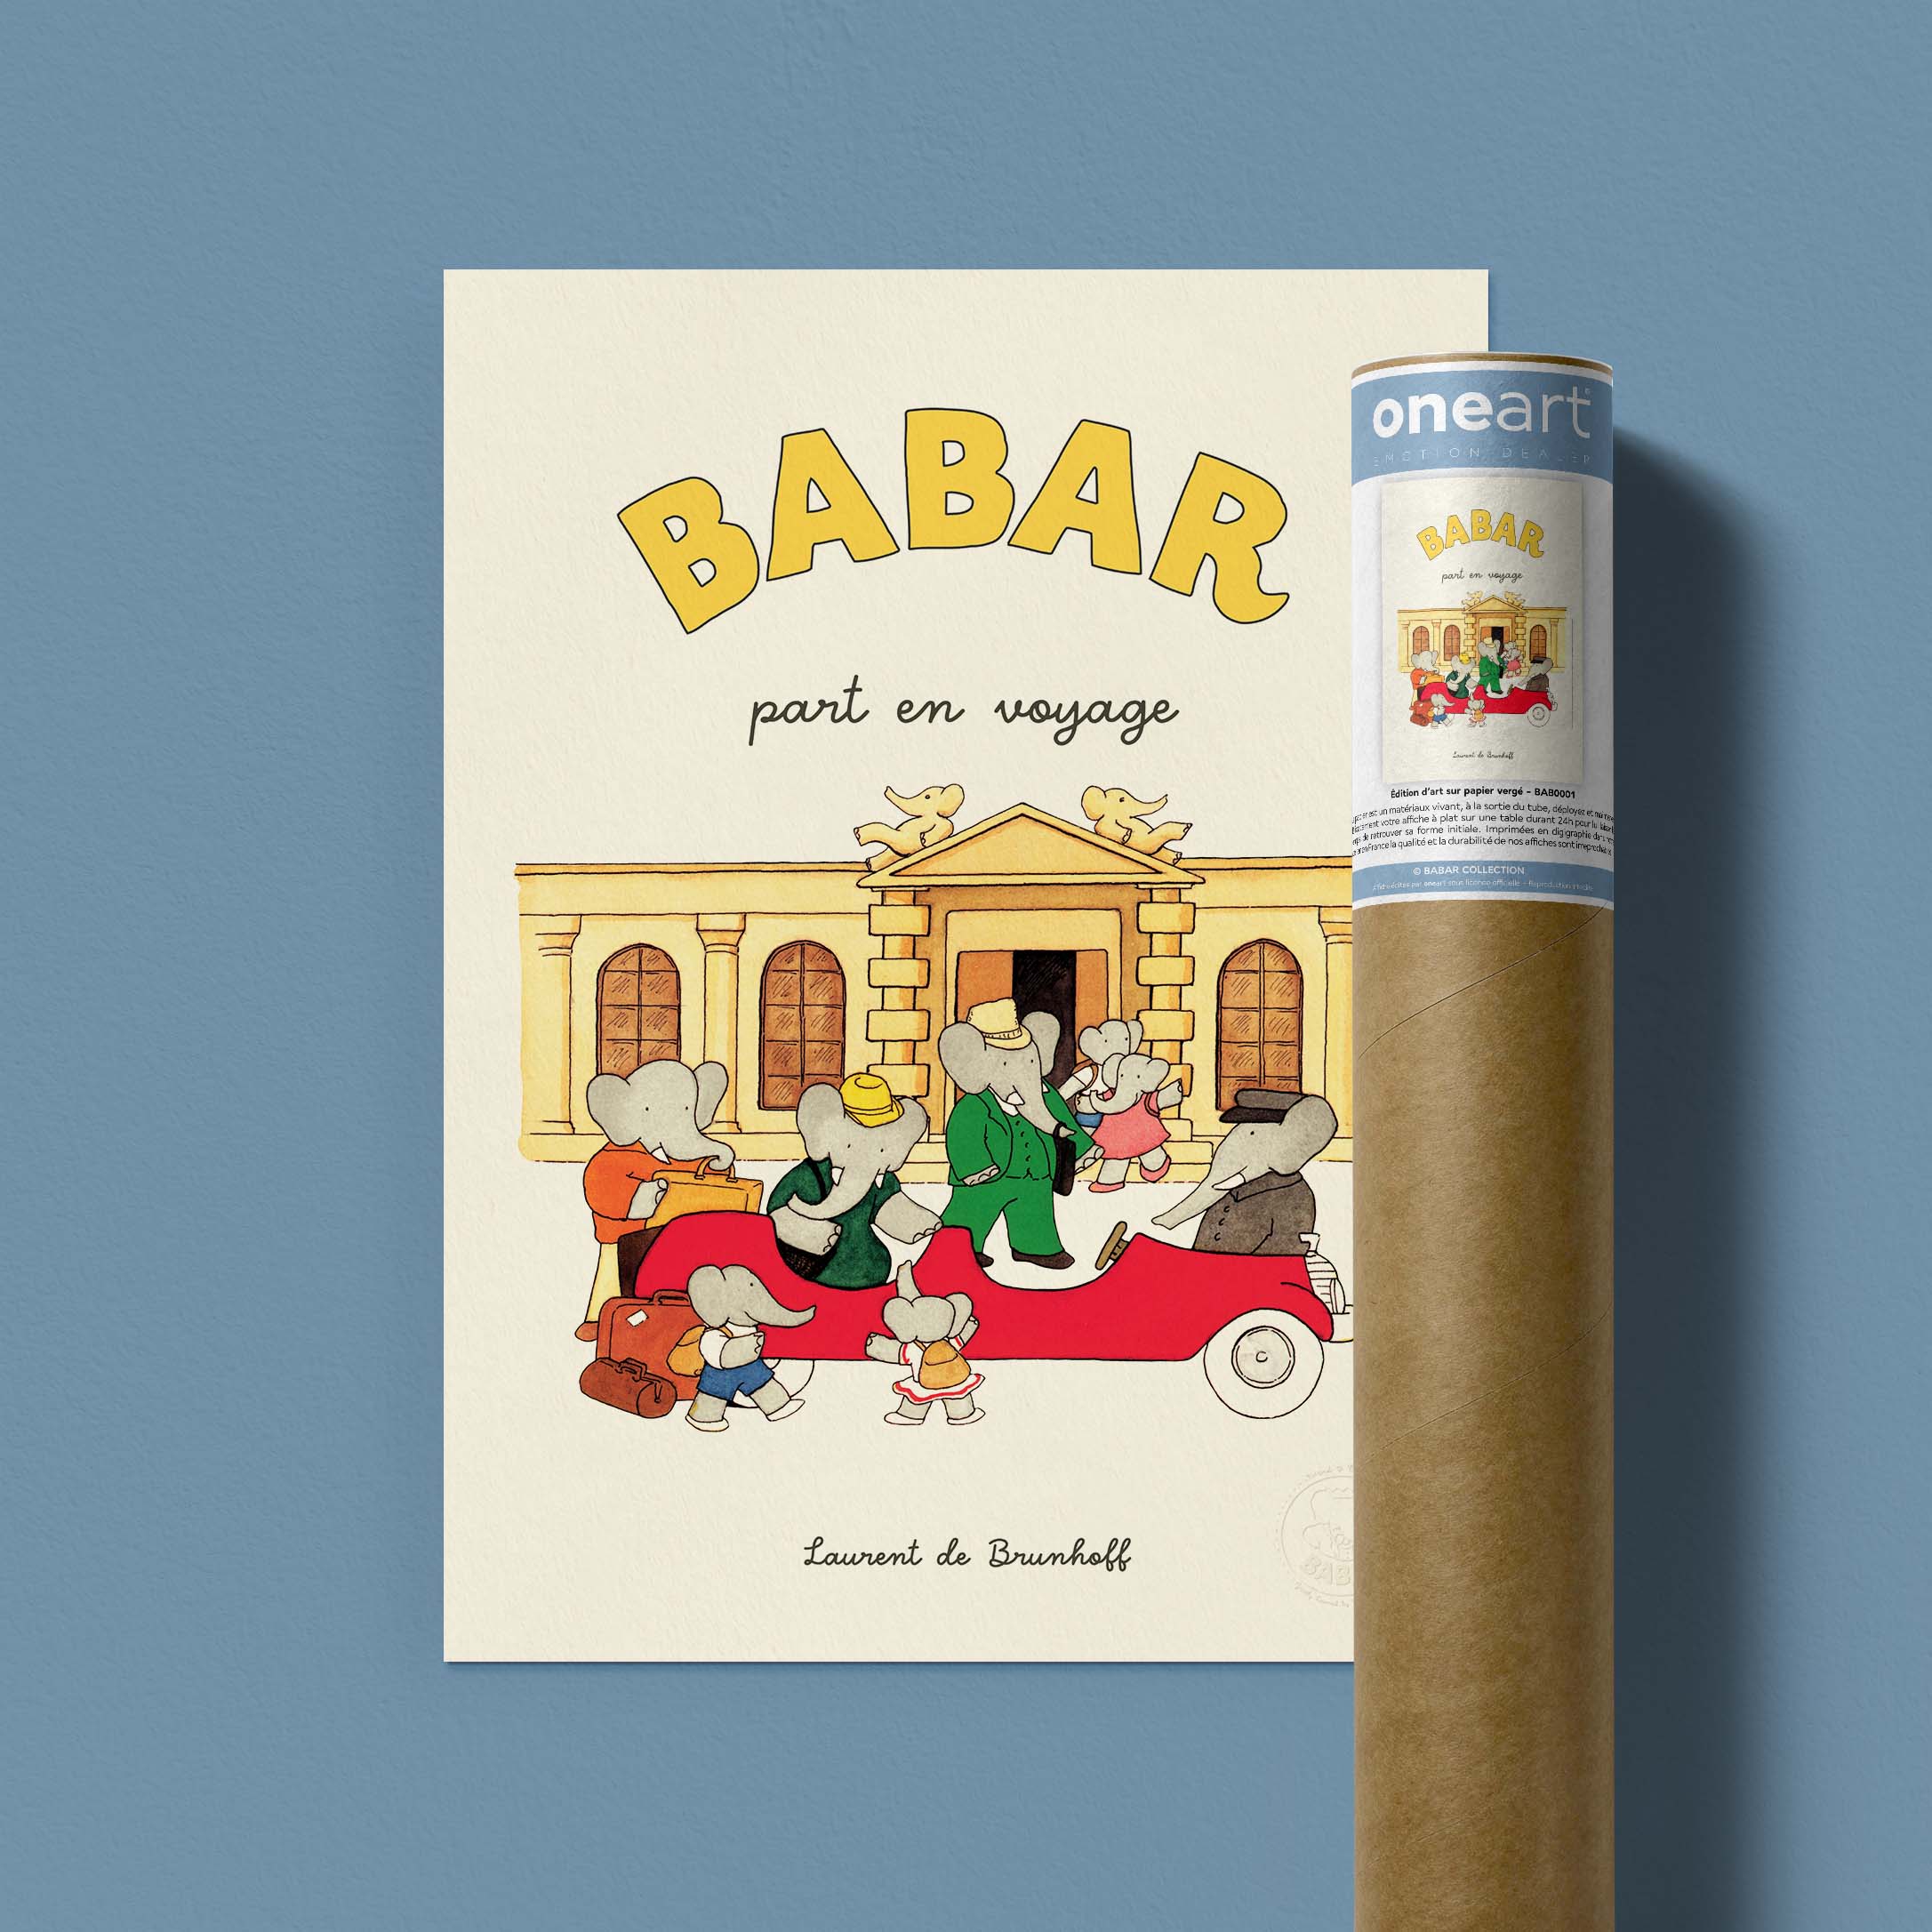 Poster Babar goes on a trip